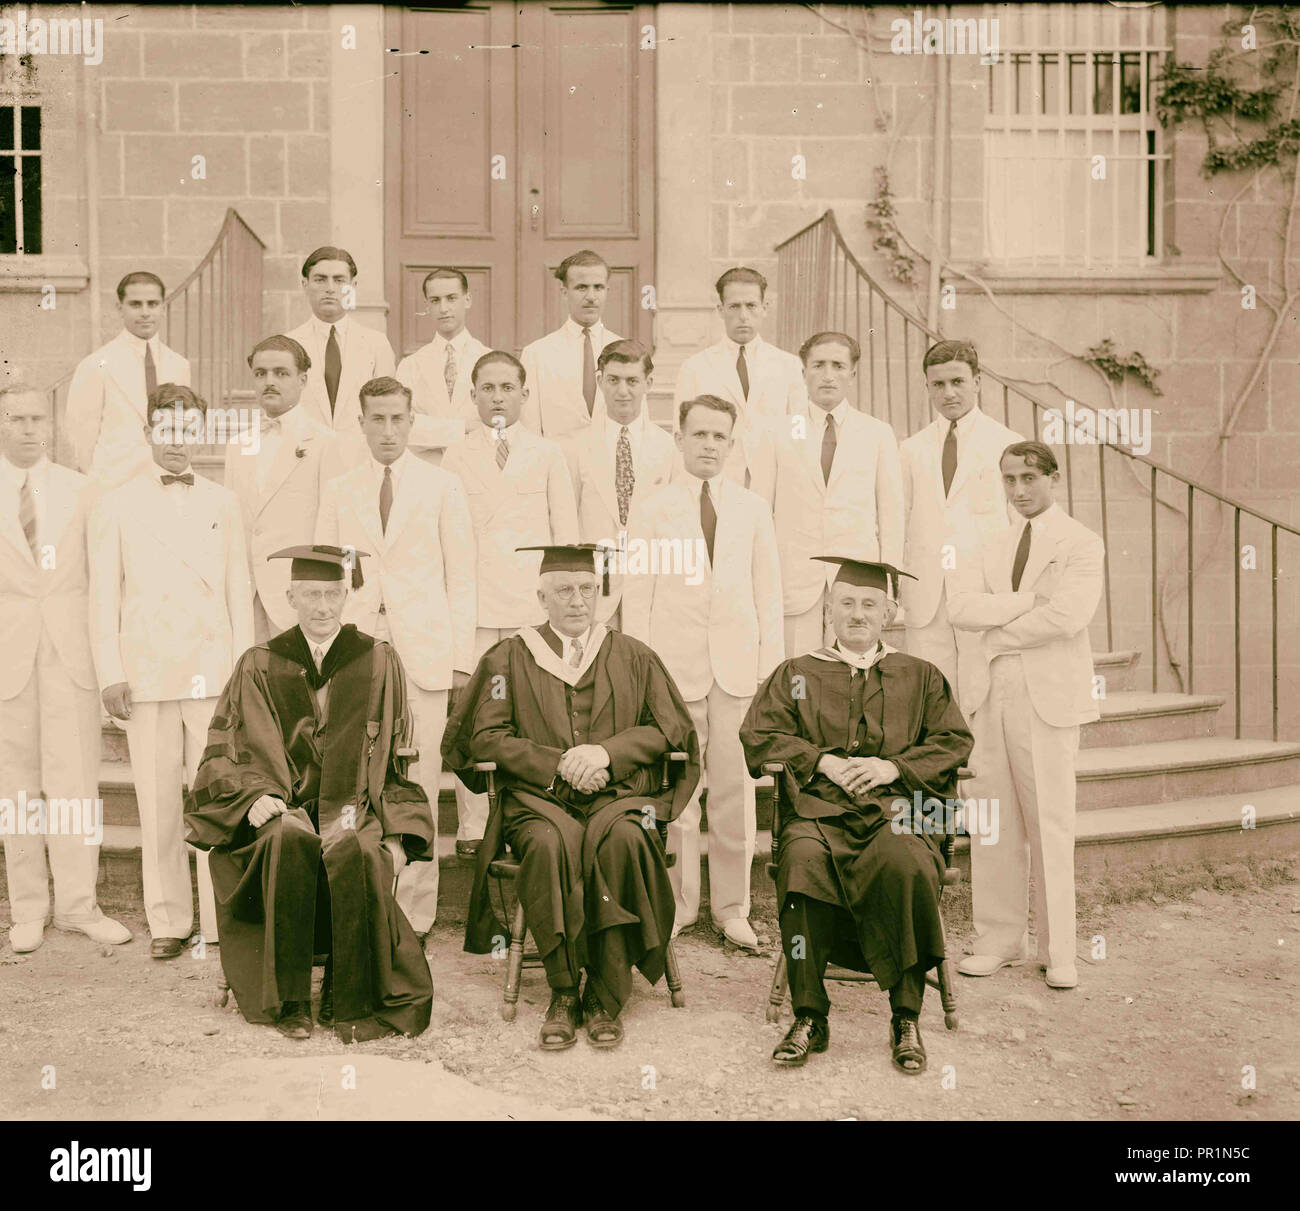 Group portrait of professors and students in front of building. 1910, Middle East, Israel and/or Palestine Stock Photo